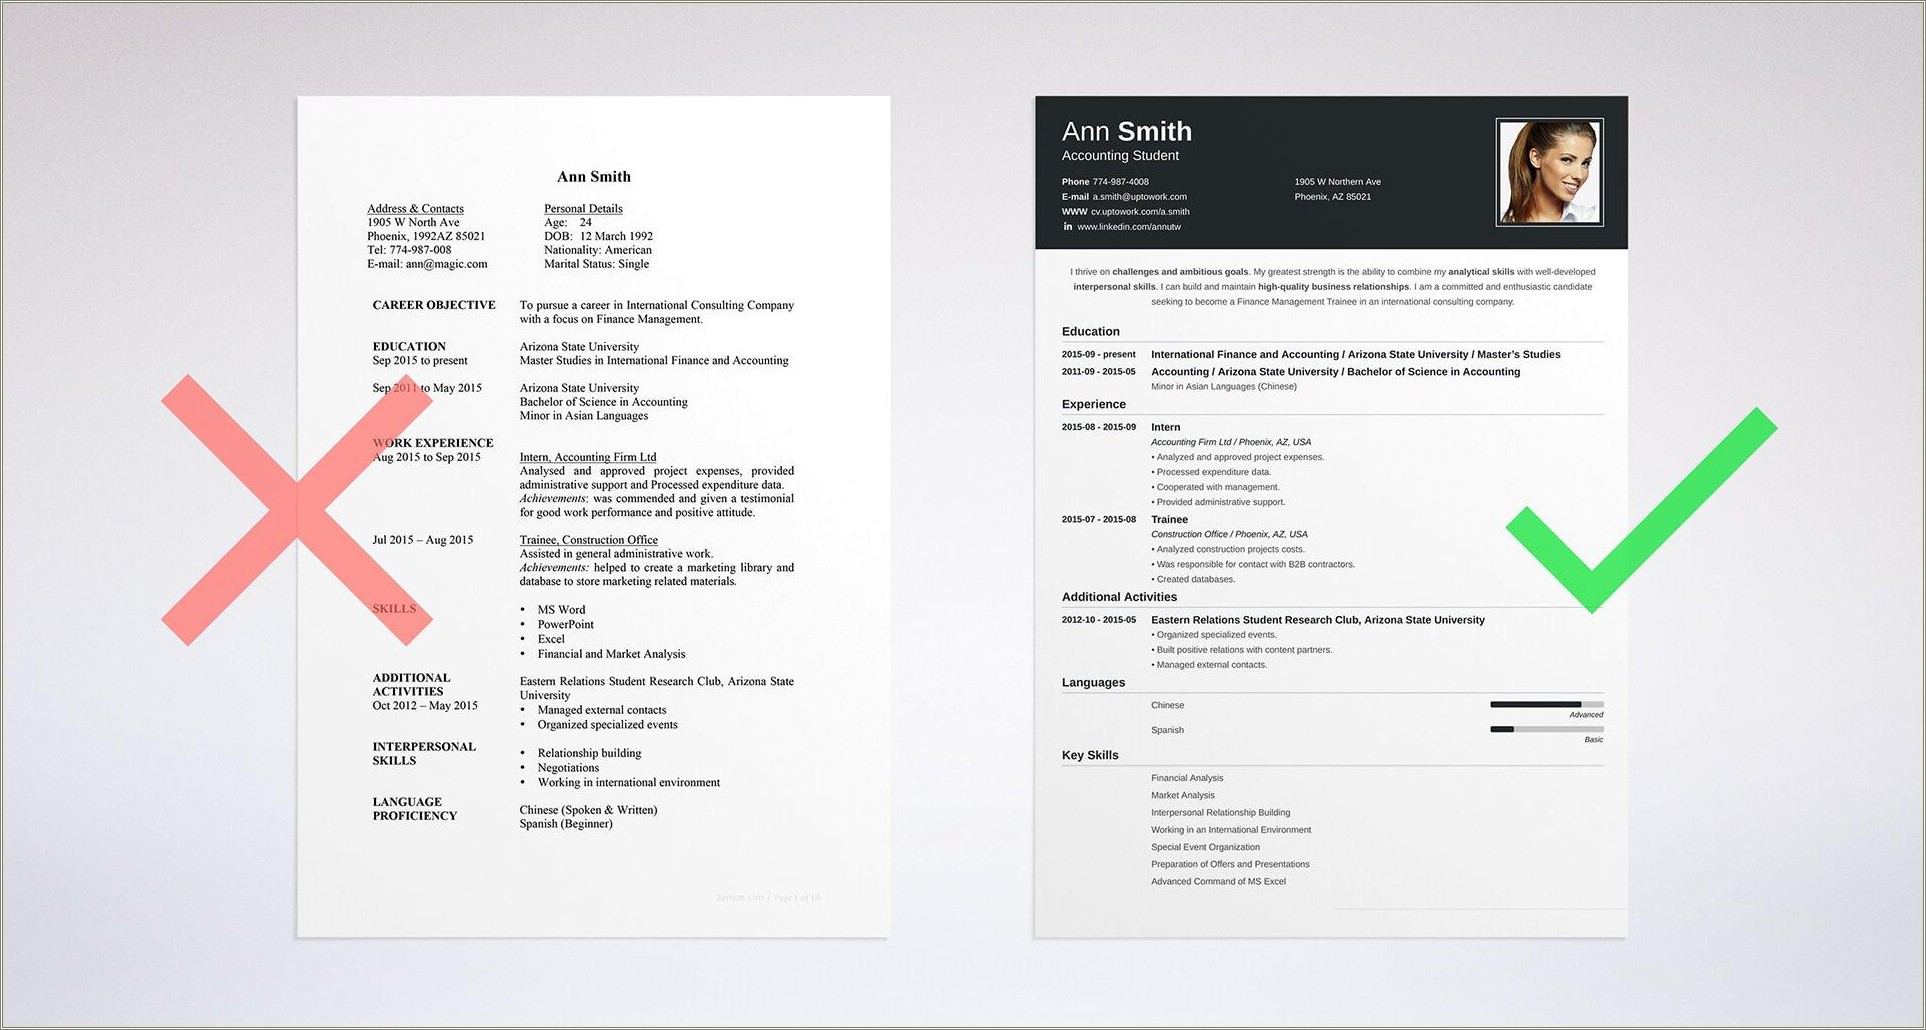 Resume Example With Objective And Competencies